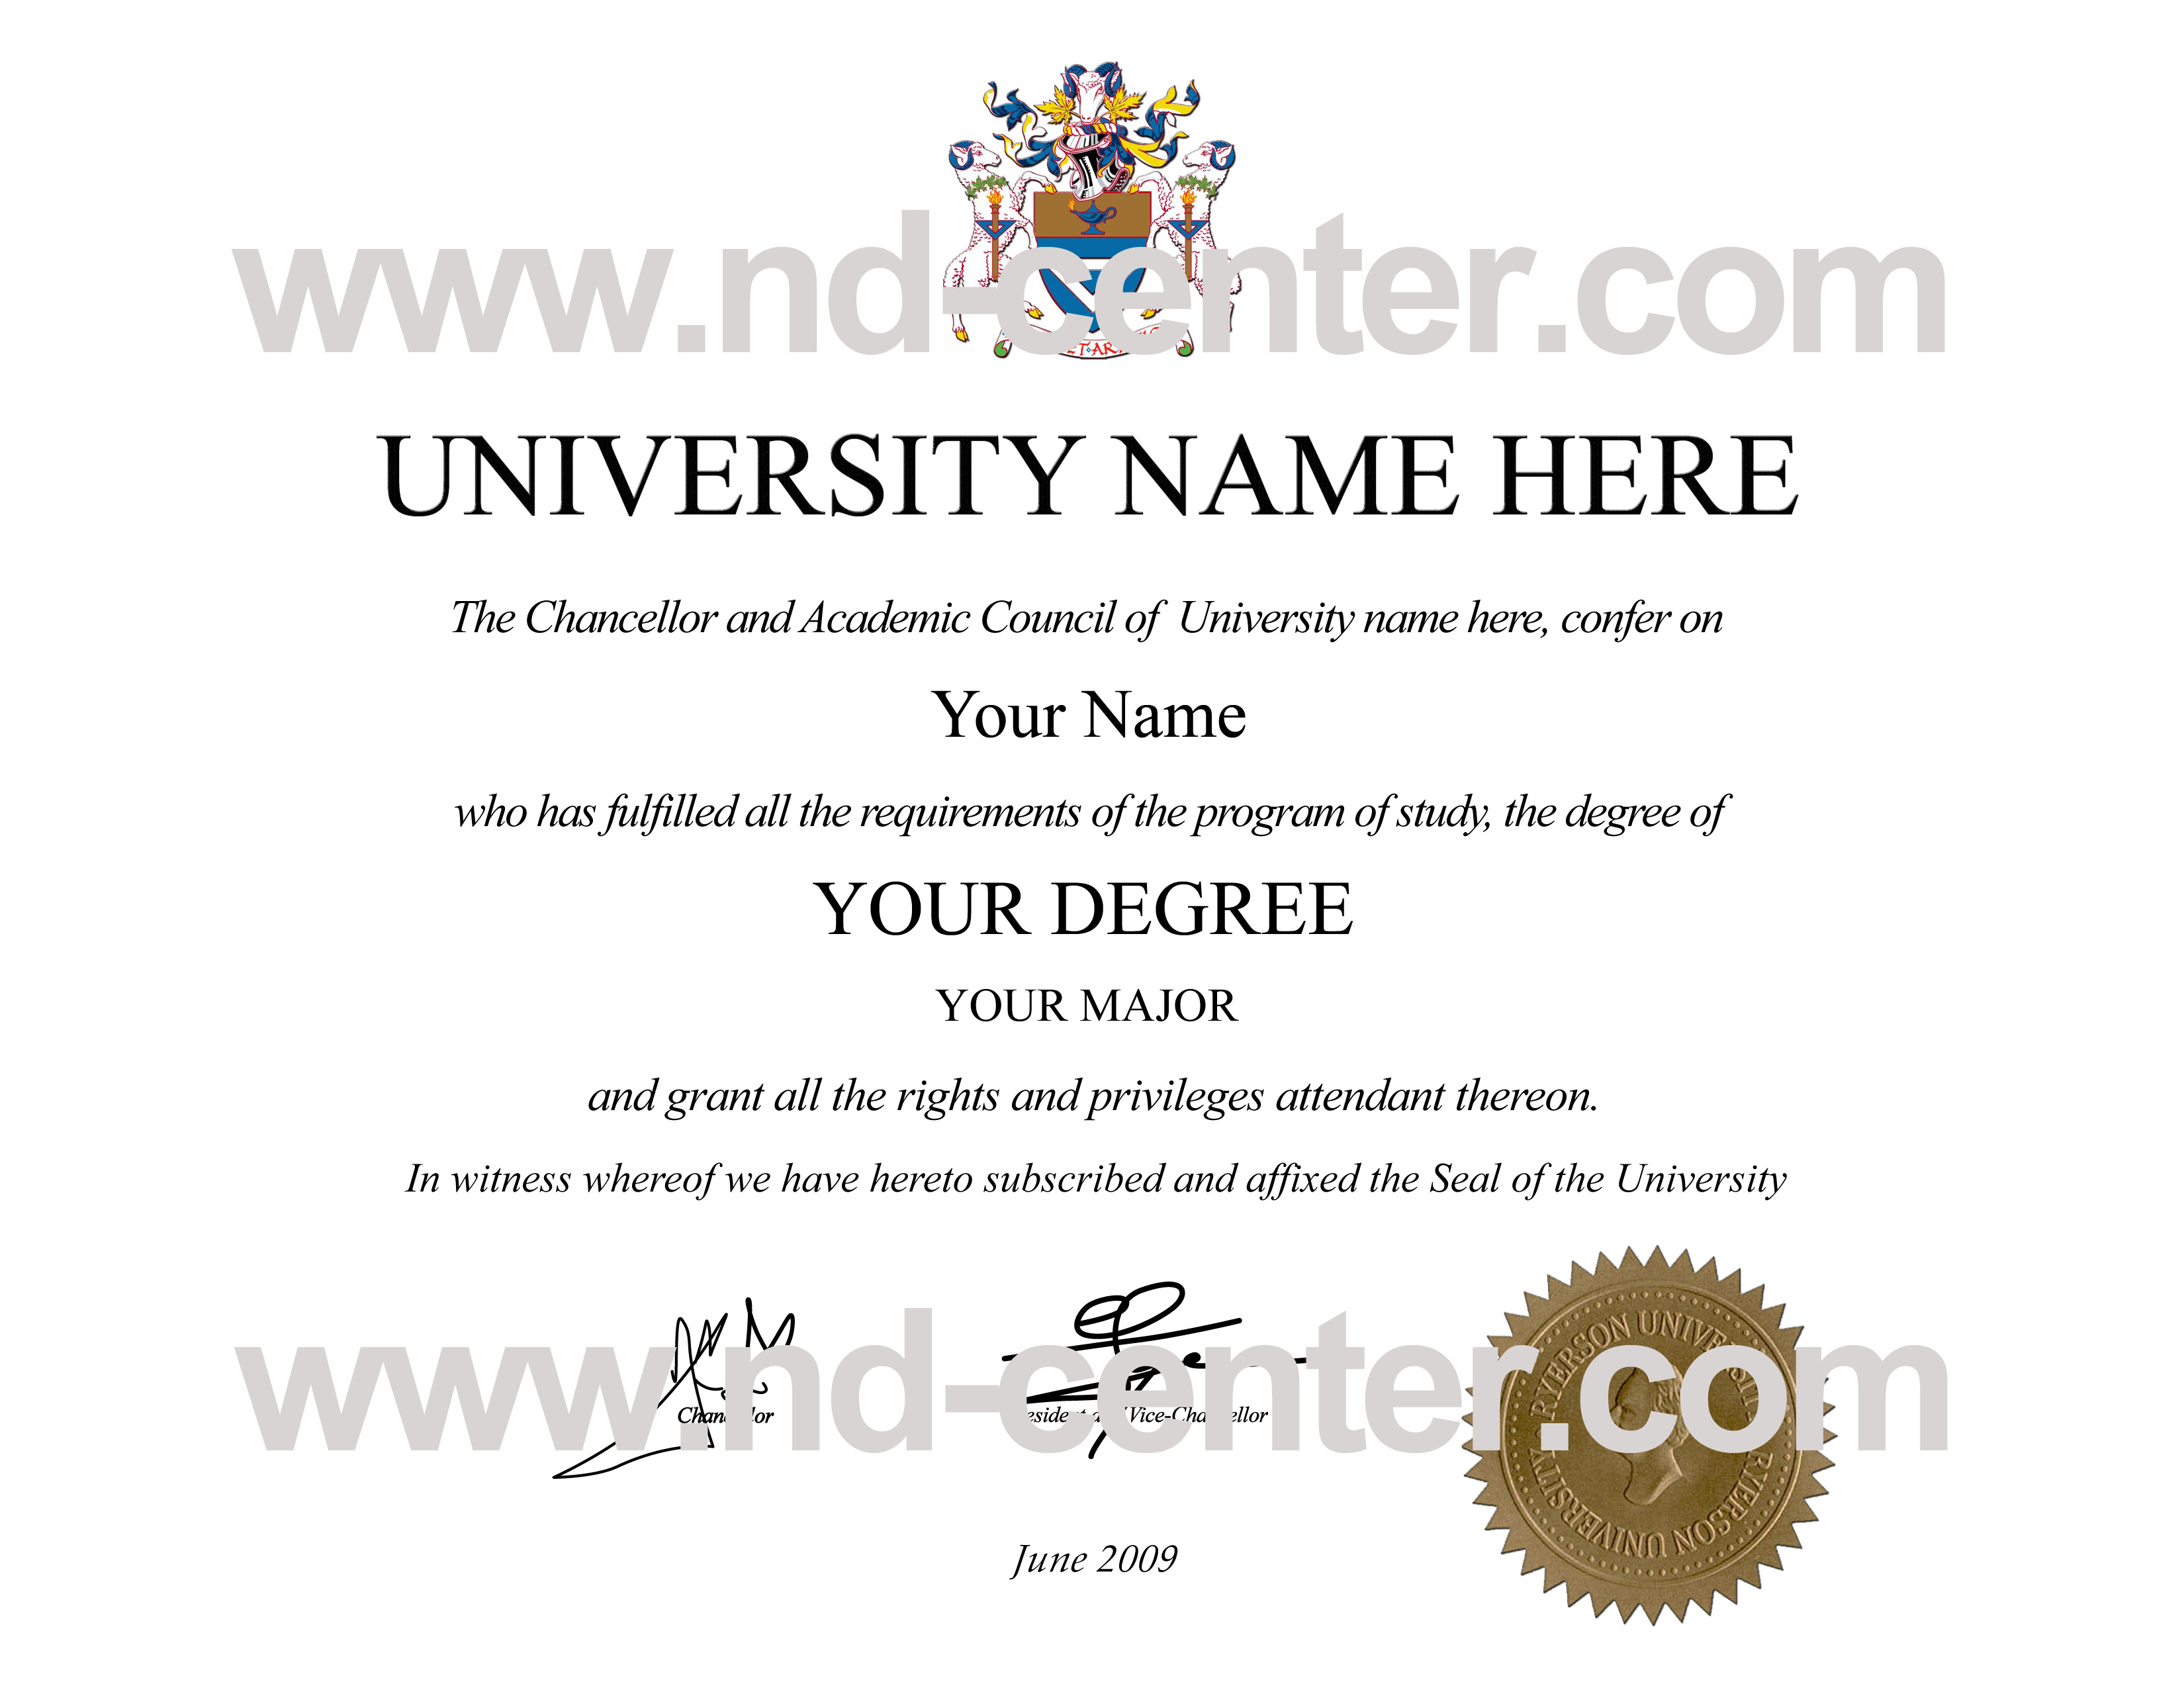 how-can-online-fake-degrees-help-you.jpg